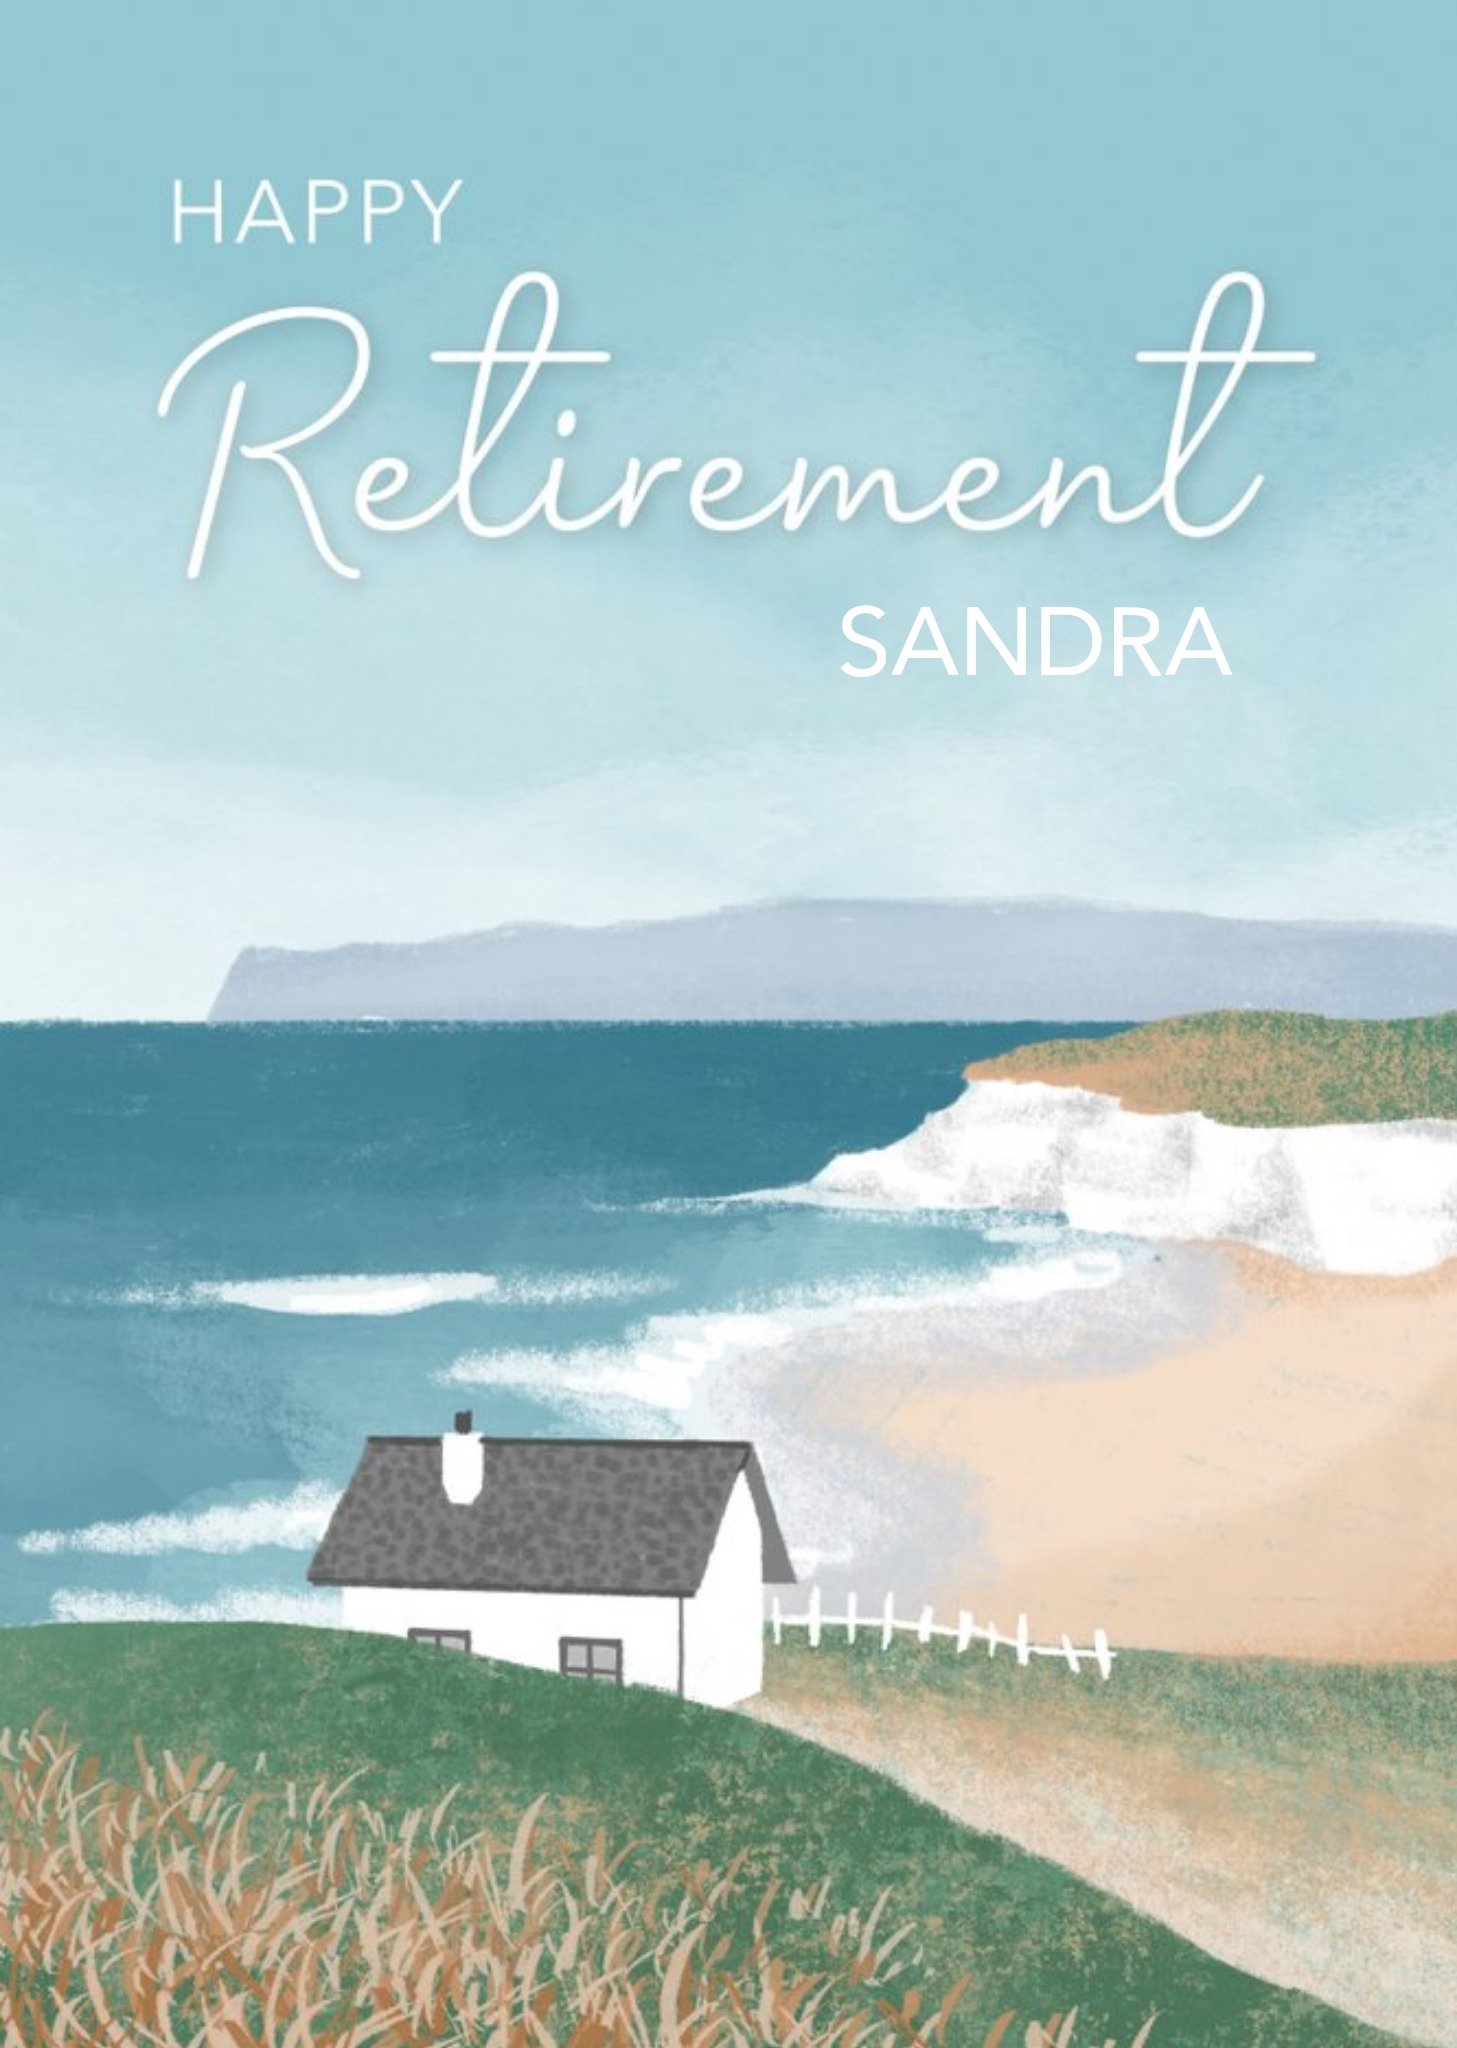 Moonpig Millicent Venton Illustrated House Overlooking The Beach. Happy Retirement Card, Large